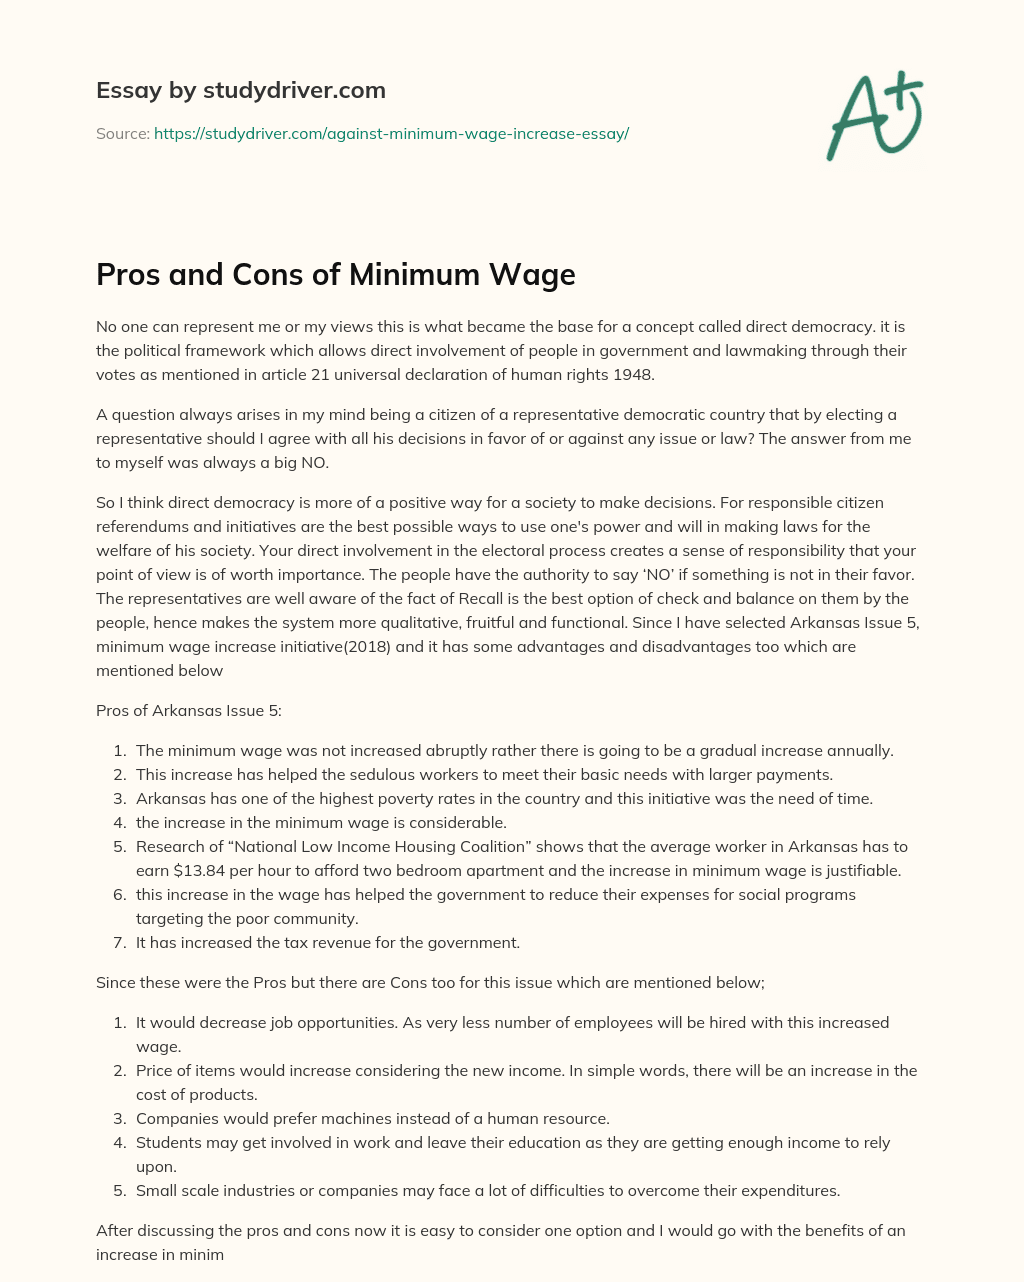 Pros and Cons of Minimum Wage essay